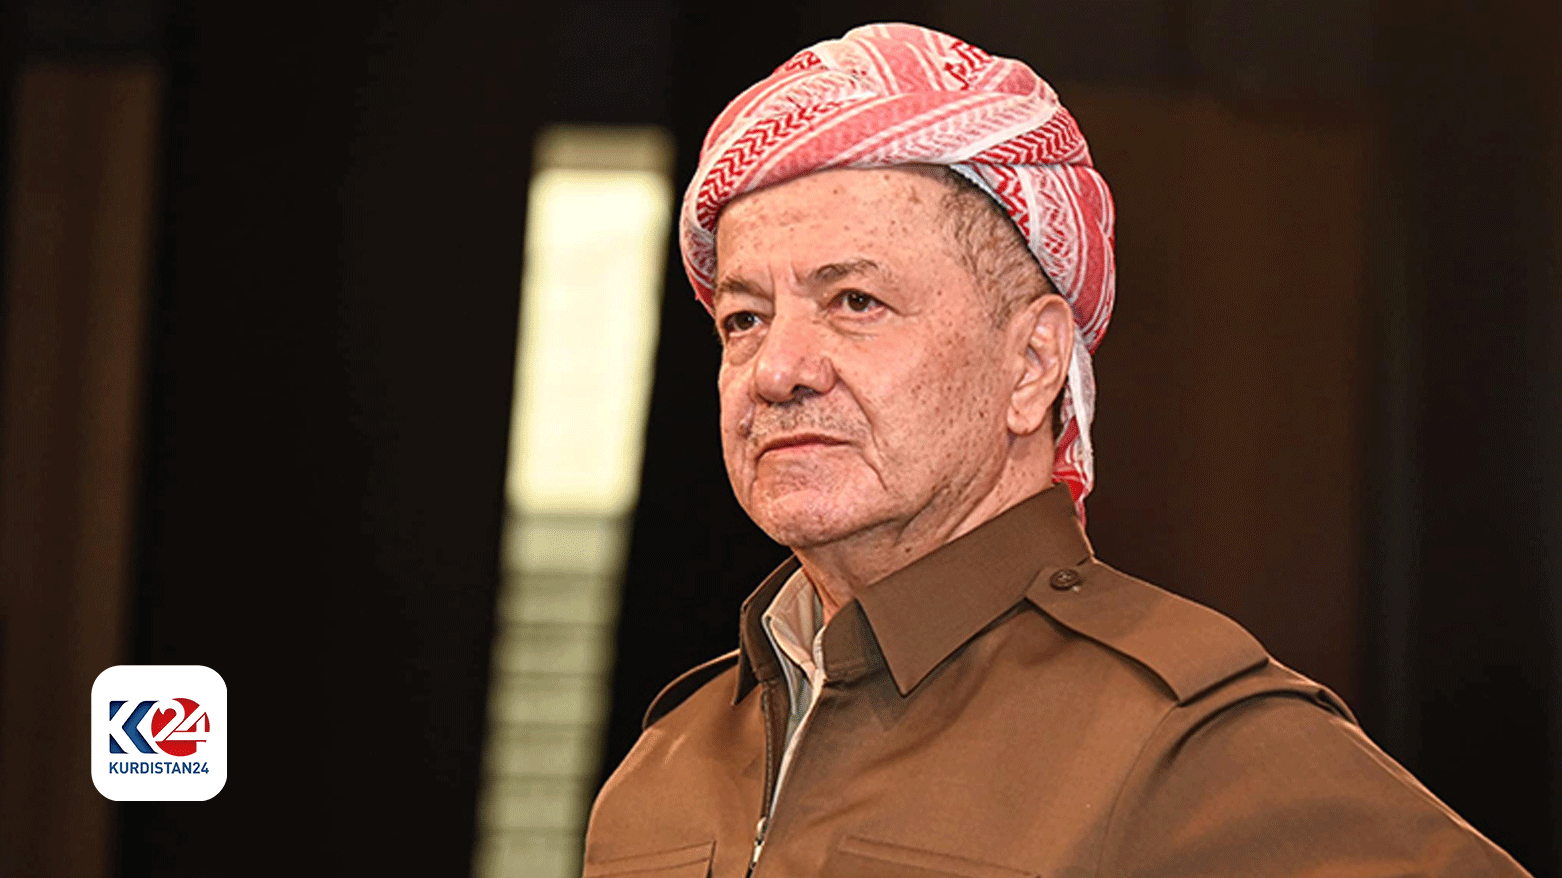 Kurdistan Democratic Party (KDP) President Masoud Barzani delivered a message on the occasion of the 36th anniversary of the chemical attack on Halabja. (Photo: Kurdistan 24)